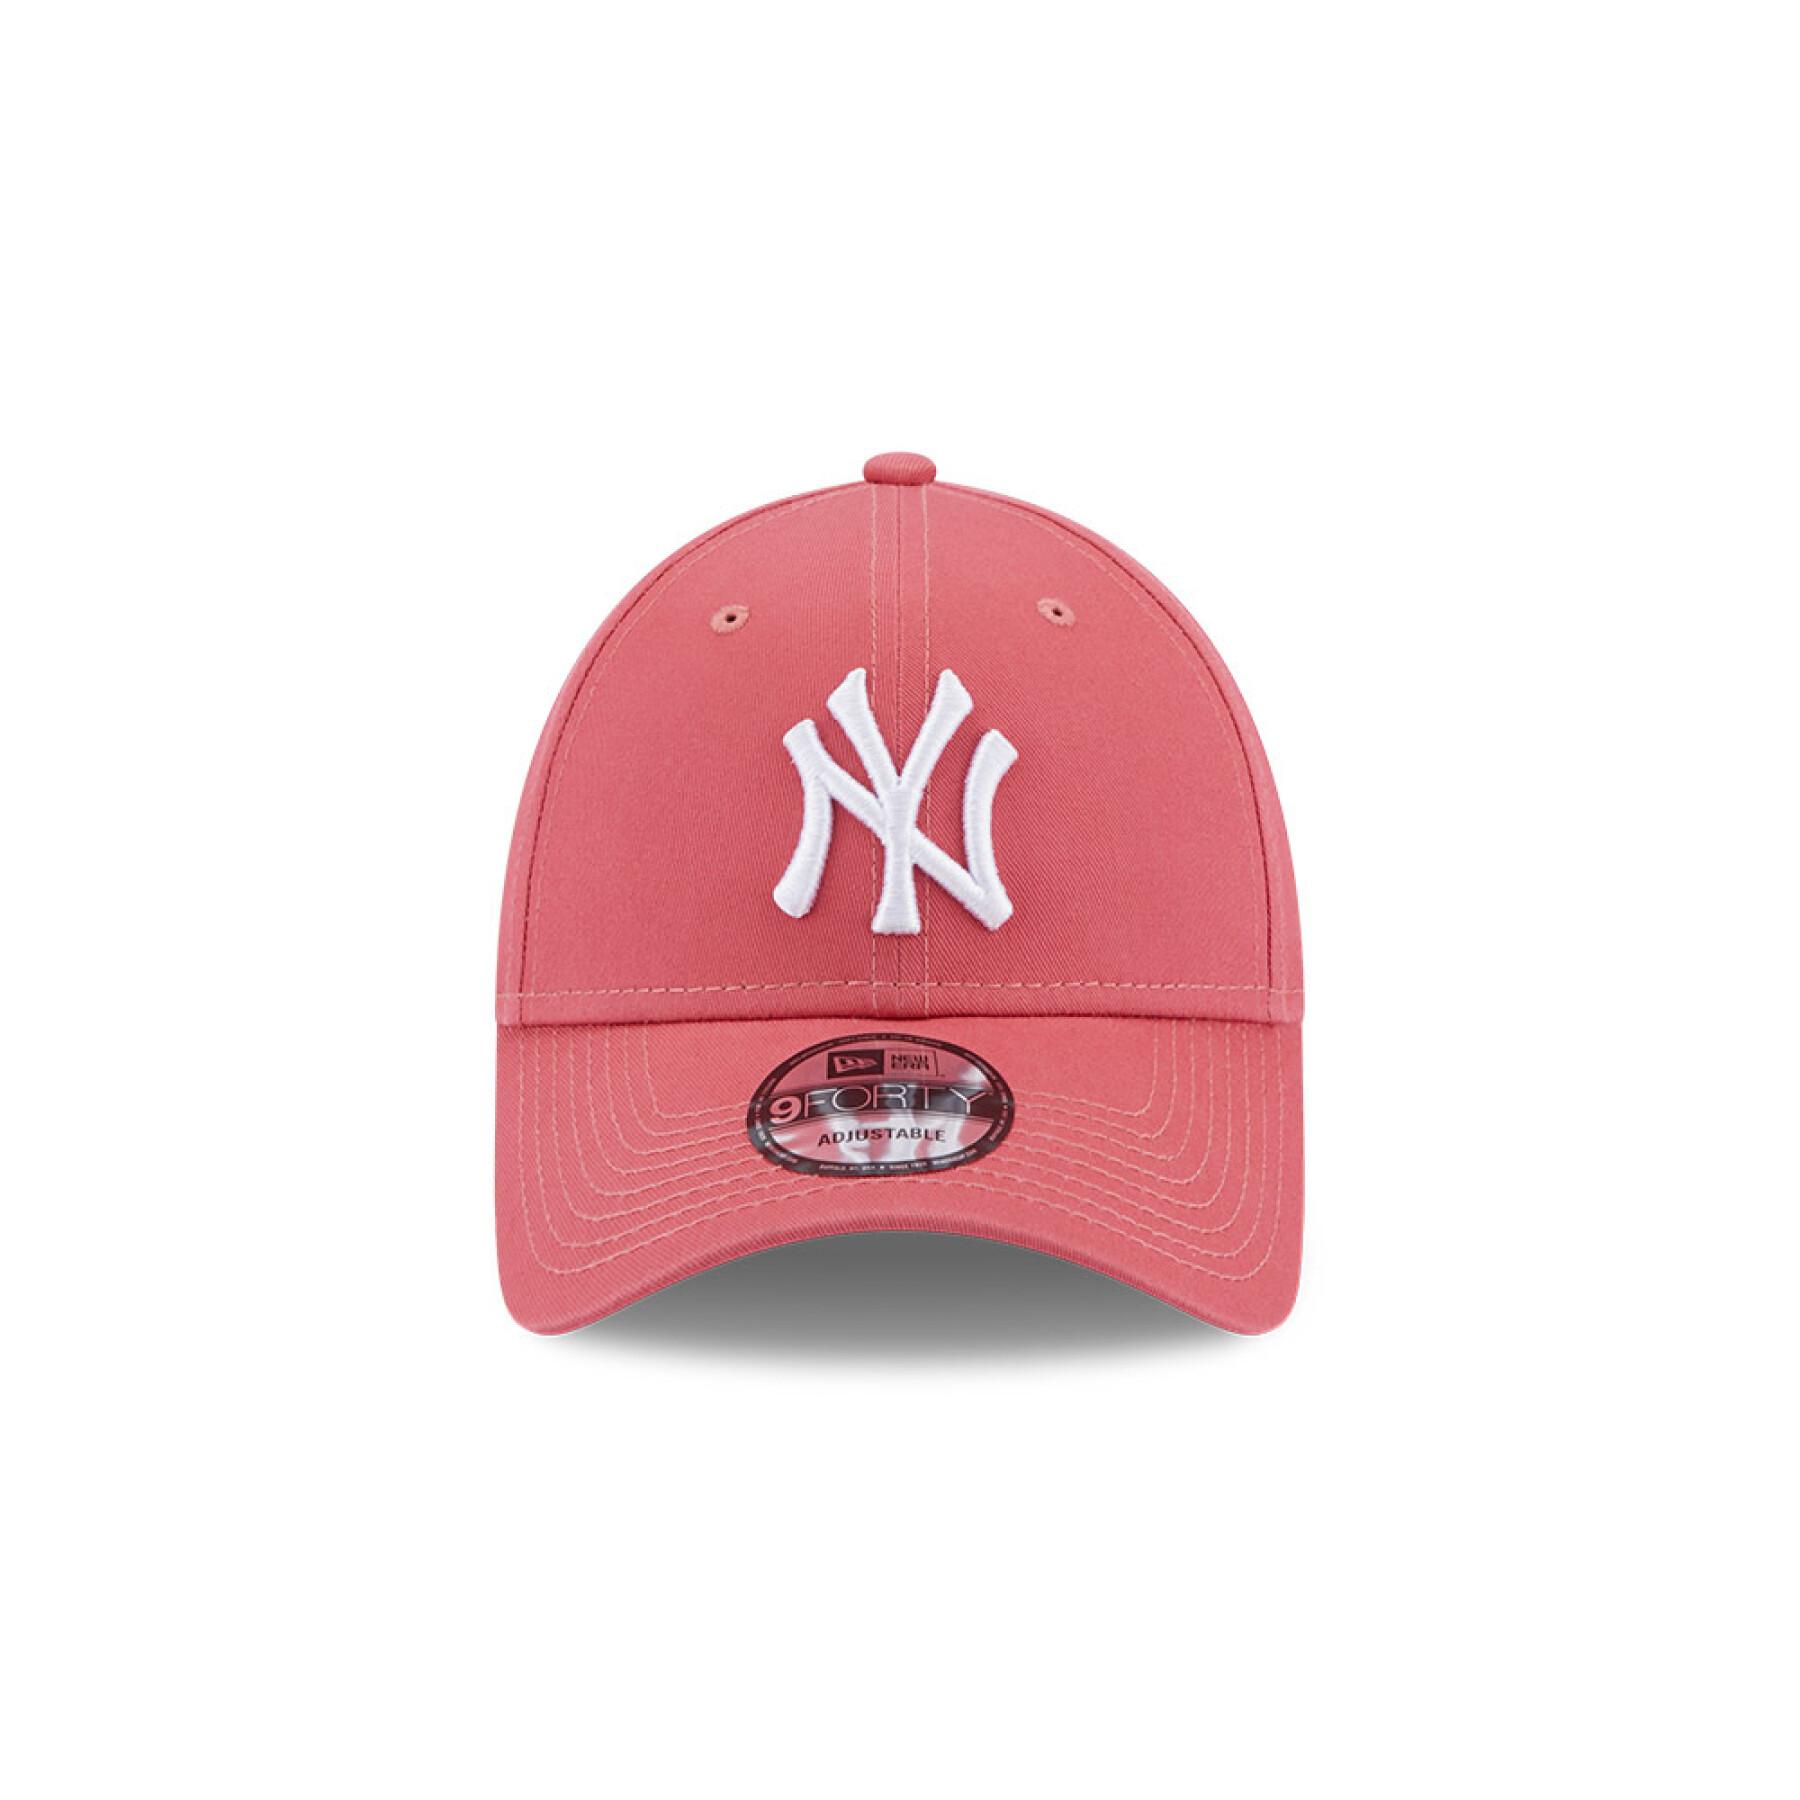 Kappe 9FORTY New York Yankees League Essential